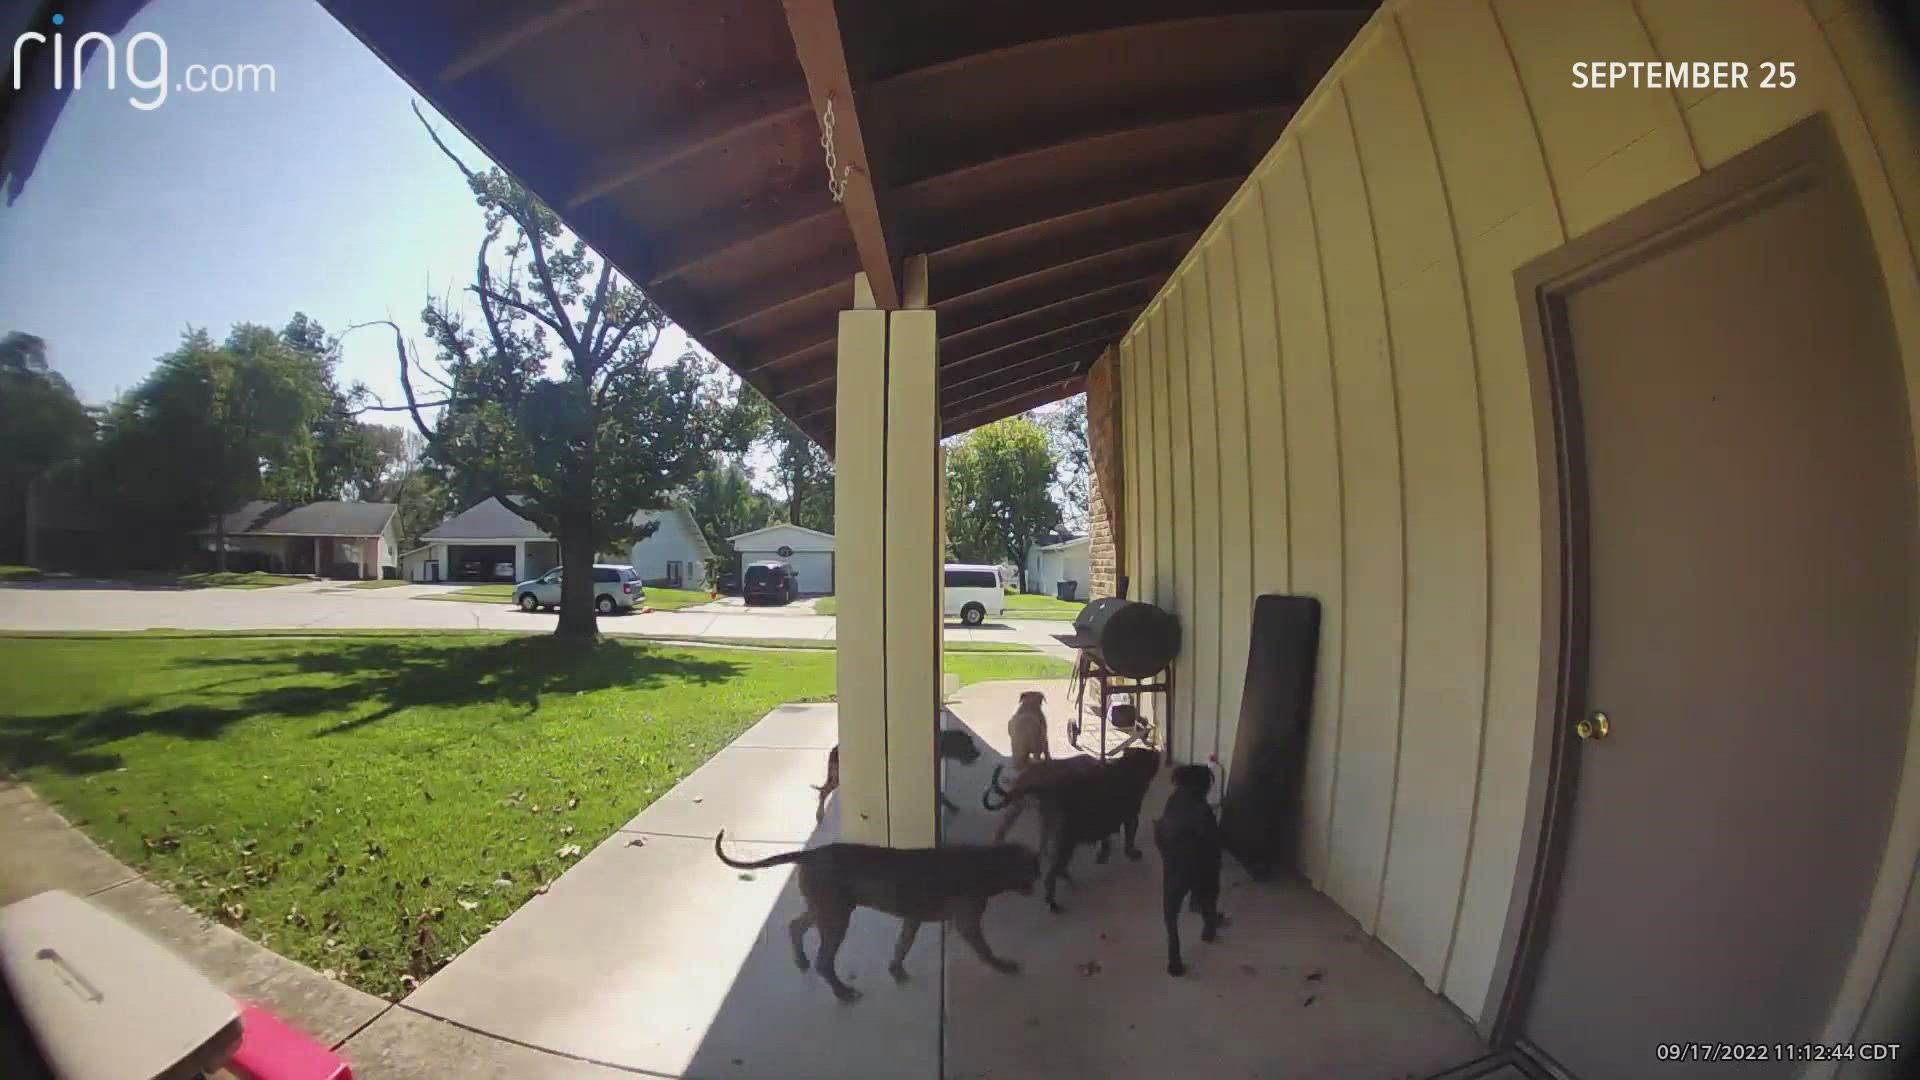 When county officials showed up at her home, she said the animal control officer told her that even with six stray dogs on her property, he couldn't do anything.